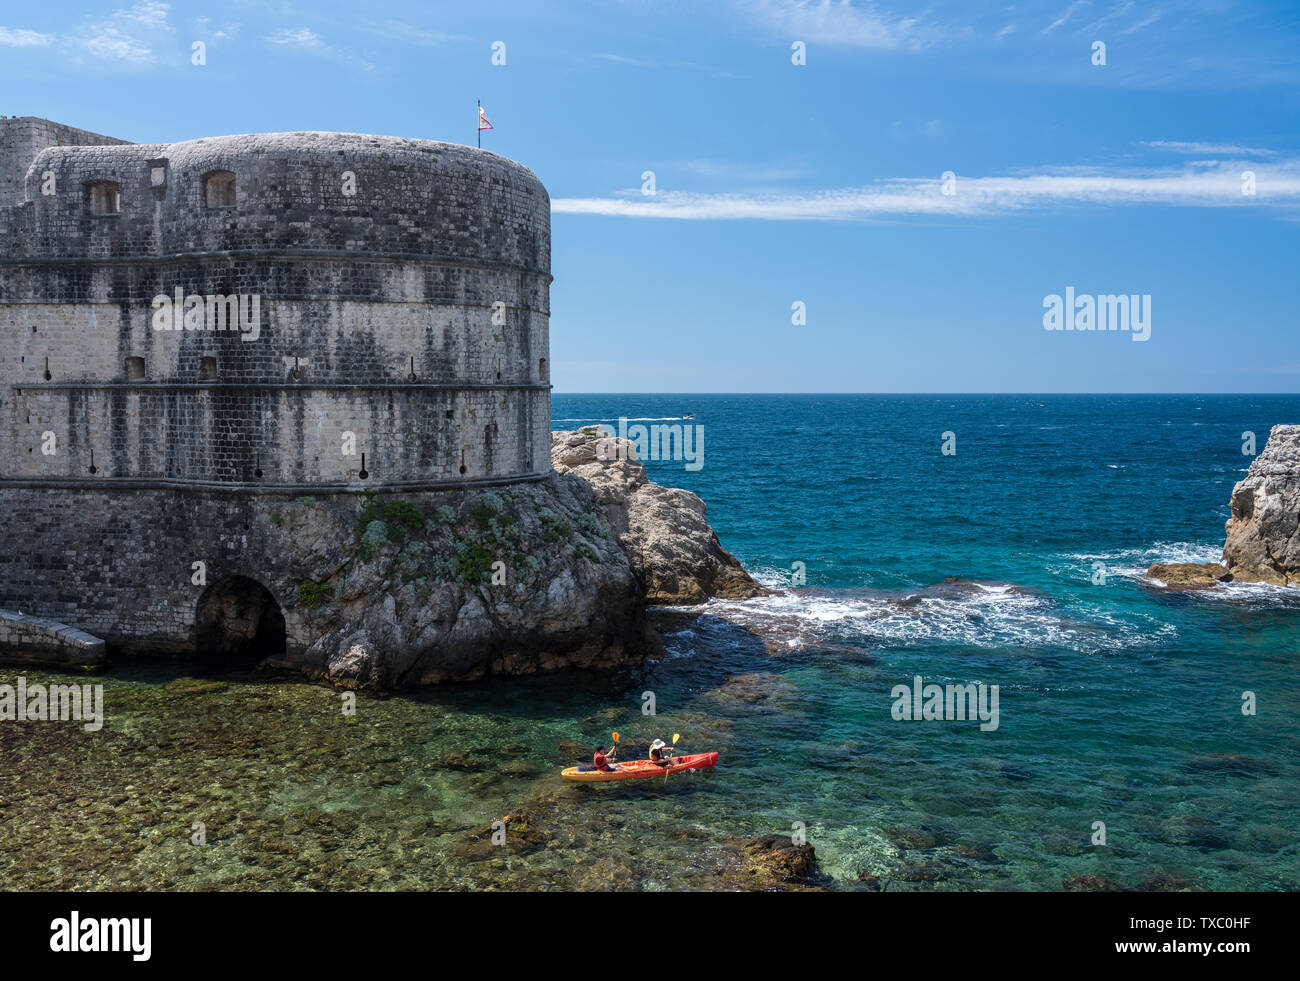 Canoe by the city walls of the old town of Dubrovnik in Croatia Stock Photo